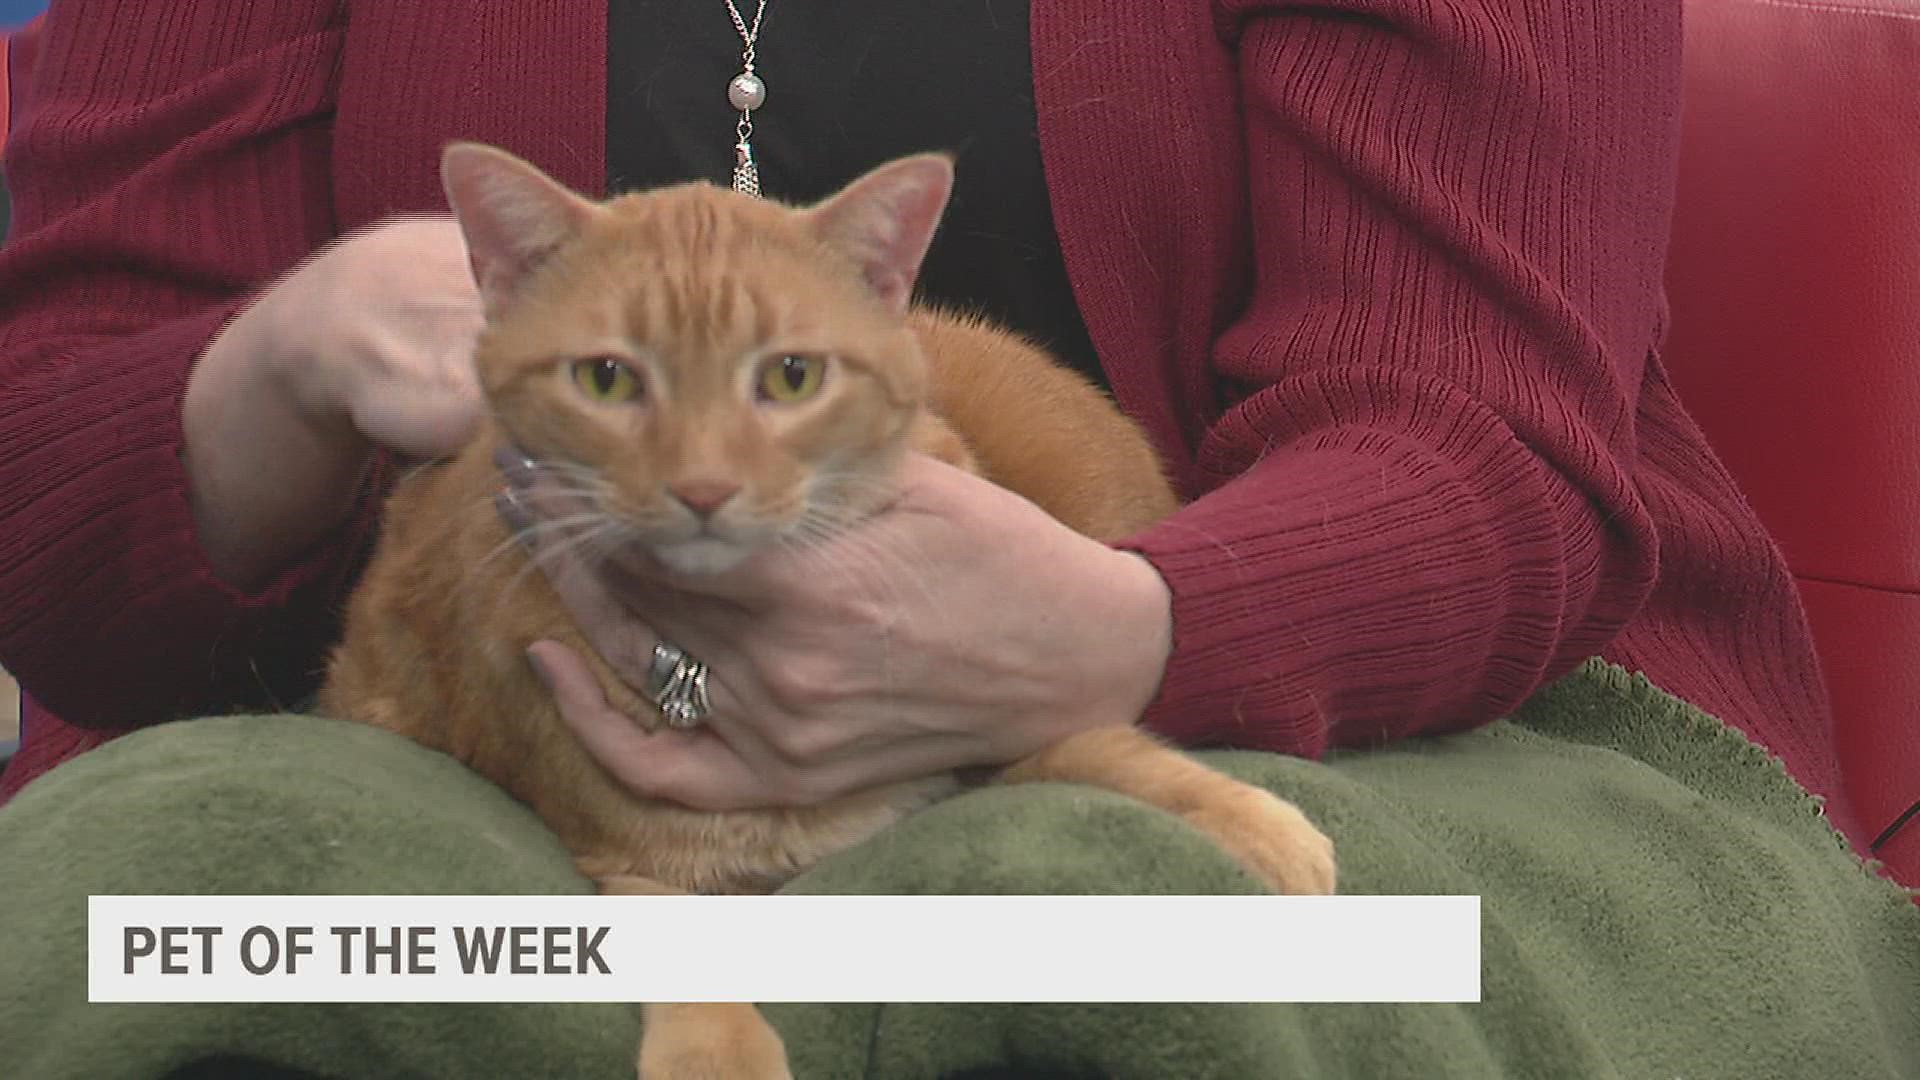 Patti McRae with the Quad City Animal Welfare Center joins us with Milo, our pet of the week! Find out how you can help the Quad City Animal Welfare Center.